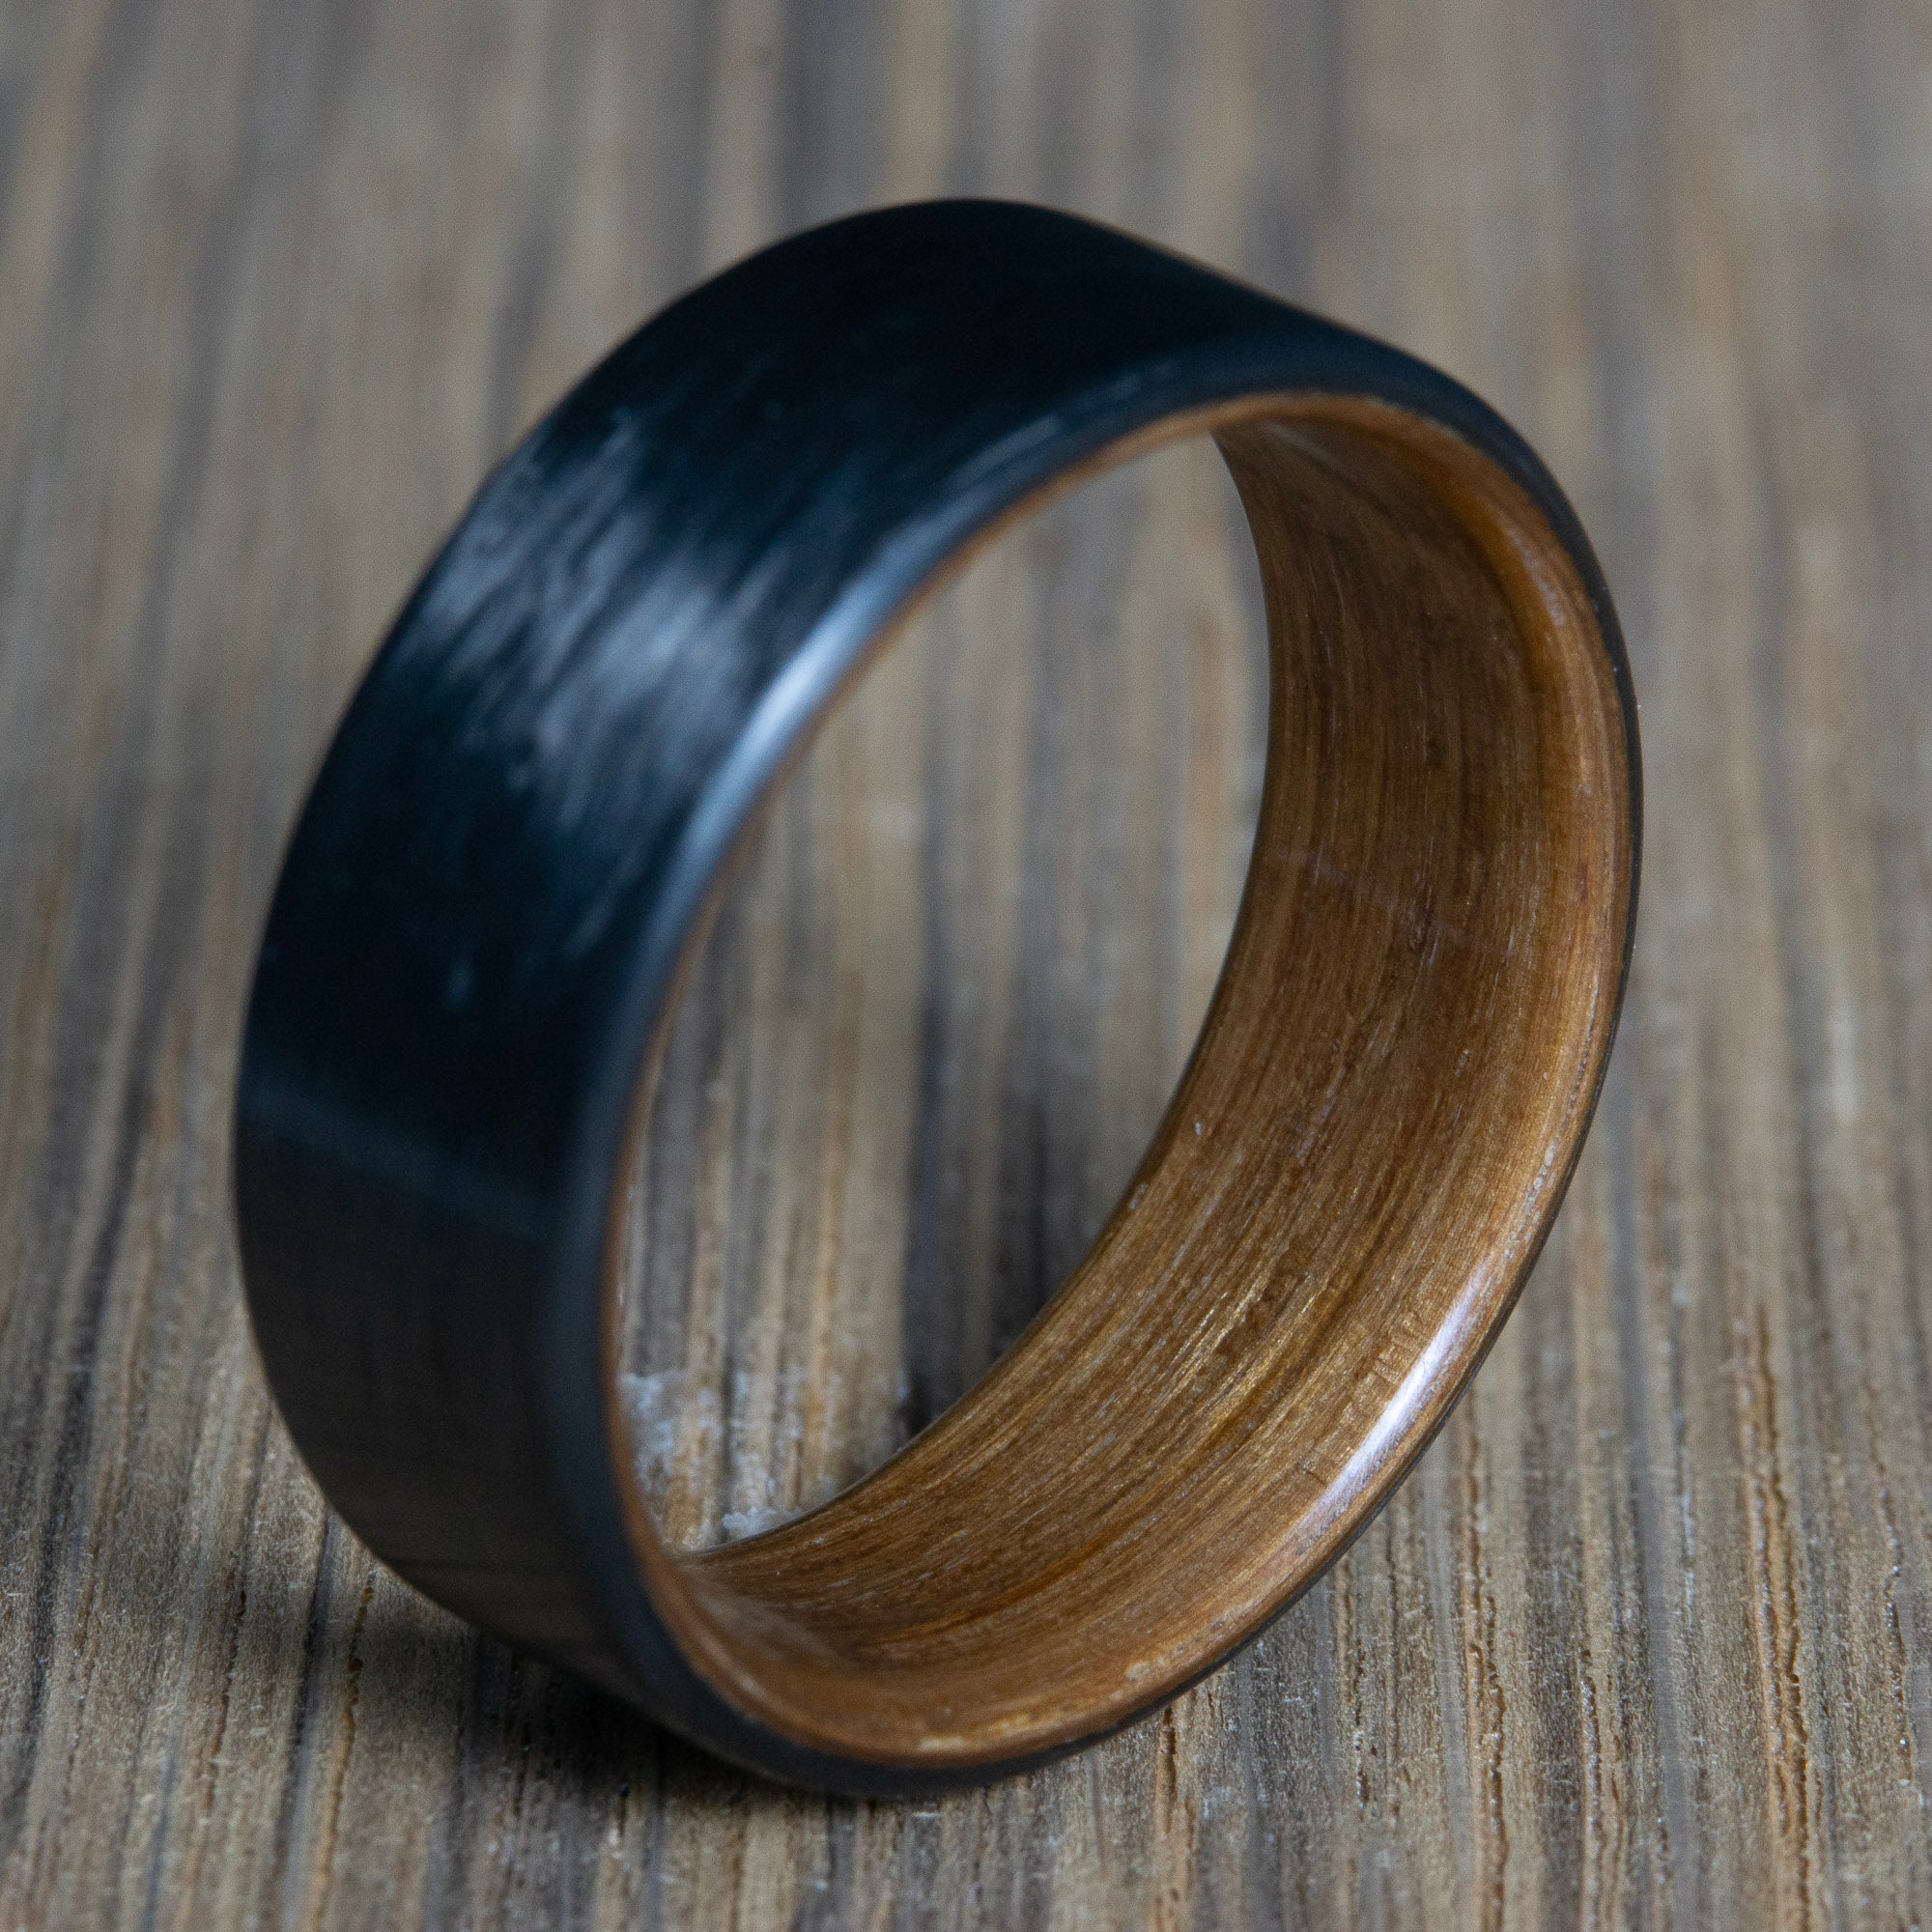 "The Rustic" Carbon fiber ring with barn wood, rustic rings for men